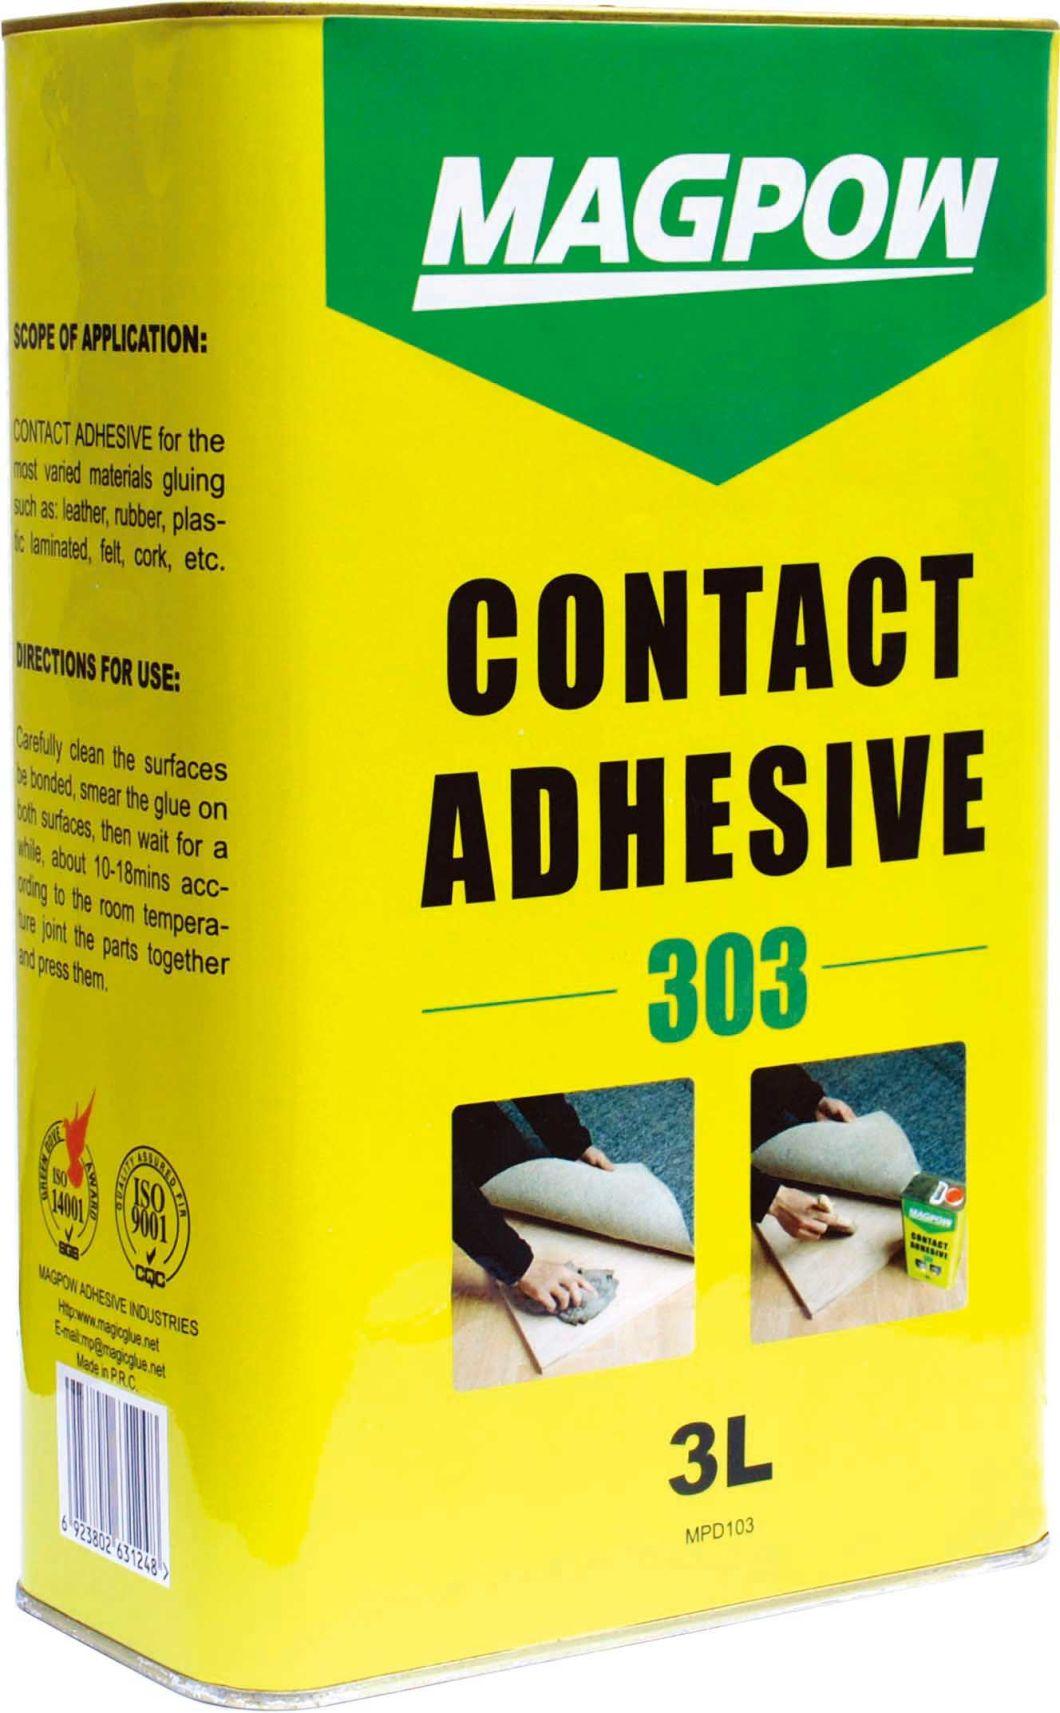 Odorless Water Based Spray Adhesive/Glue for Foam of Mattress and Sofa